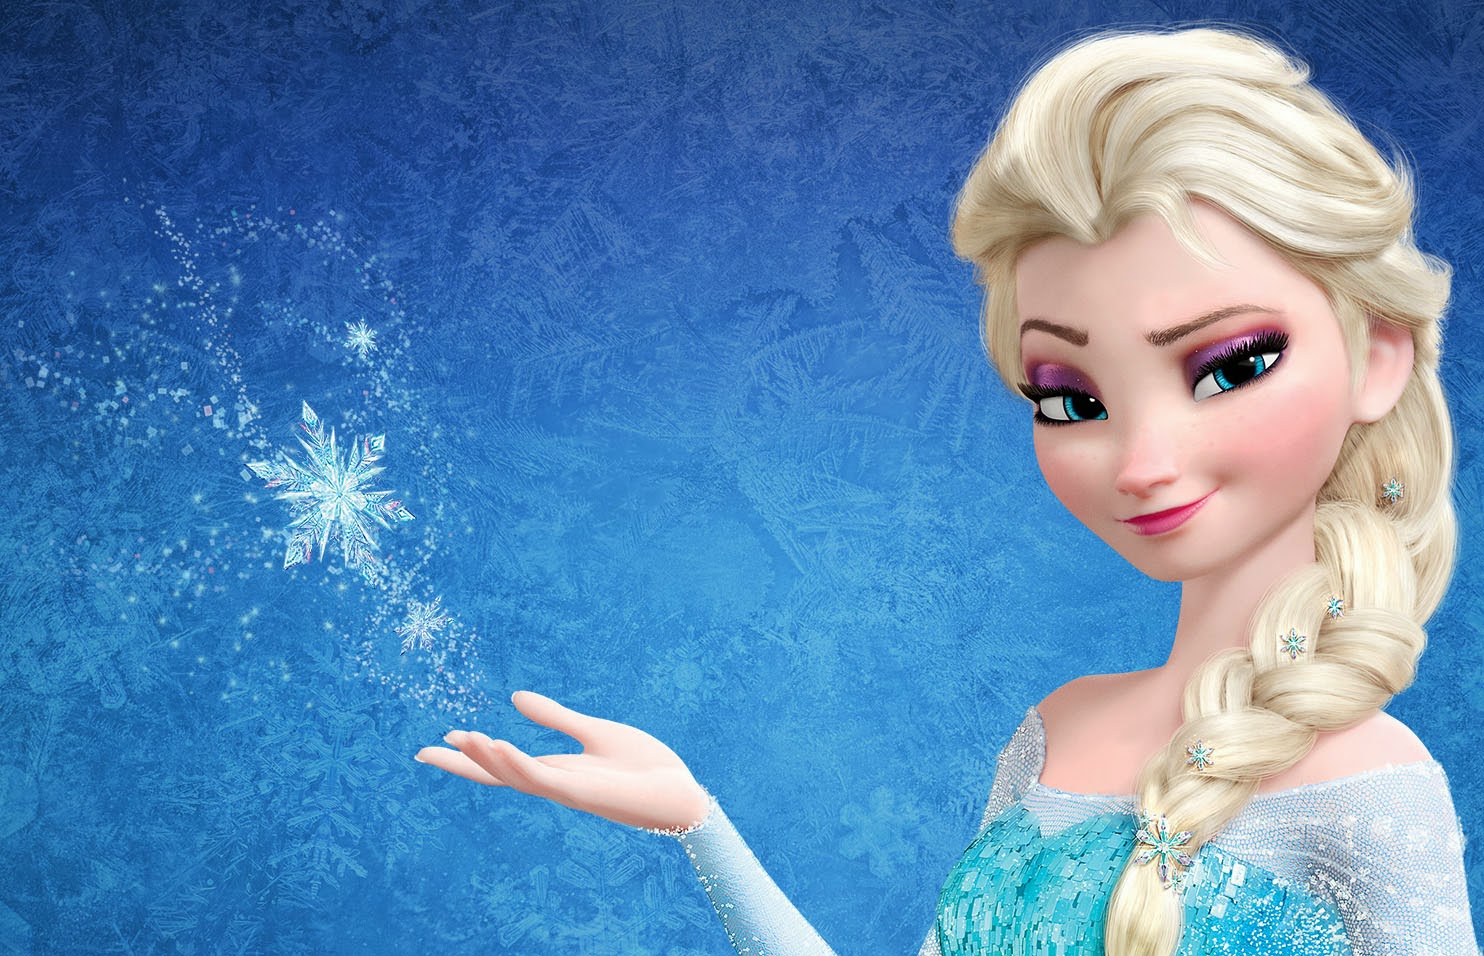 Why Frozen’s “Let it Go” may be the most UN-Christian song your kids will ever sing